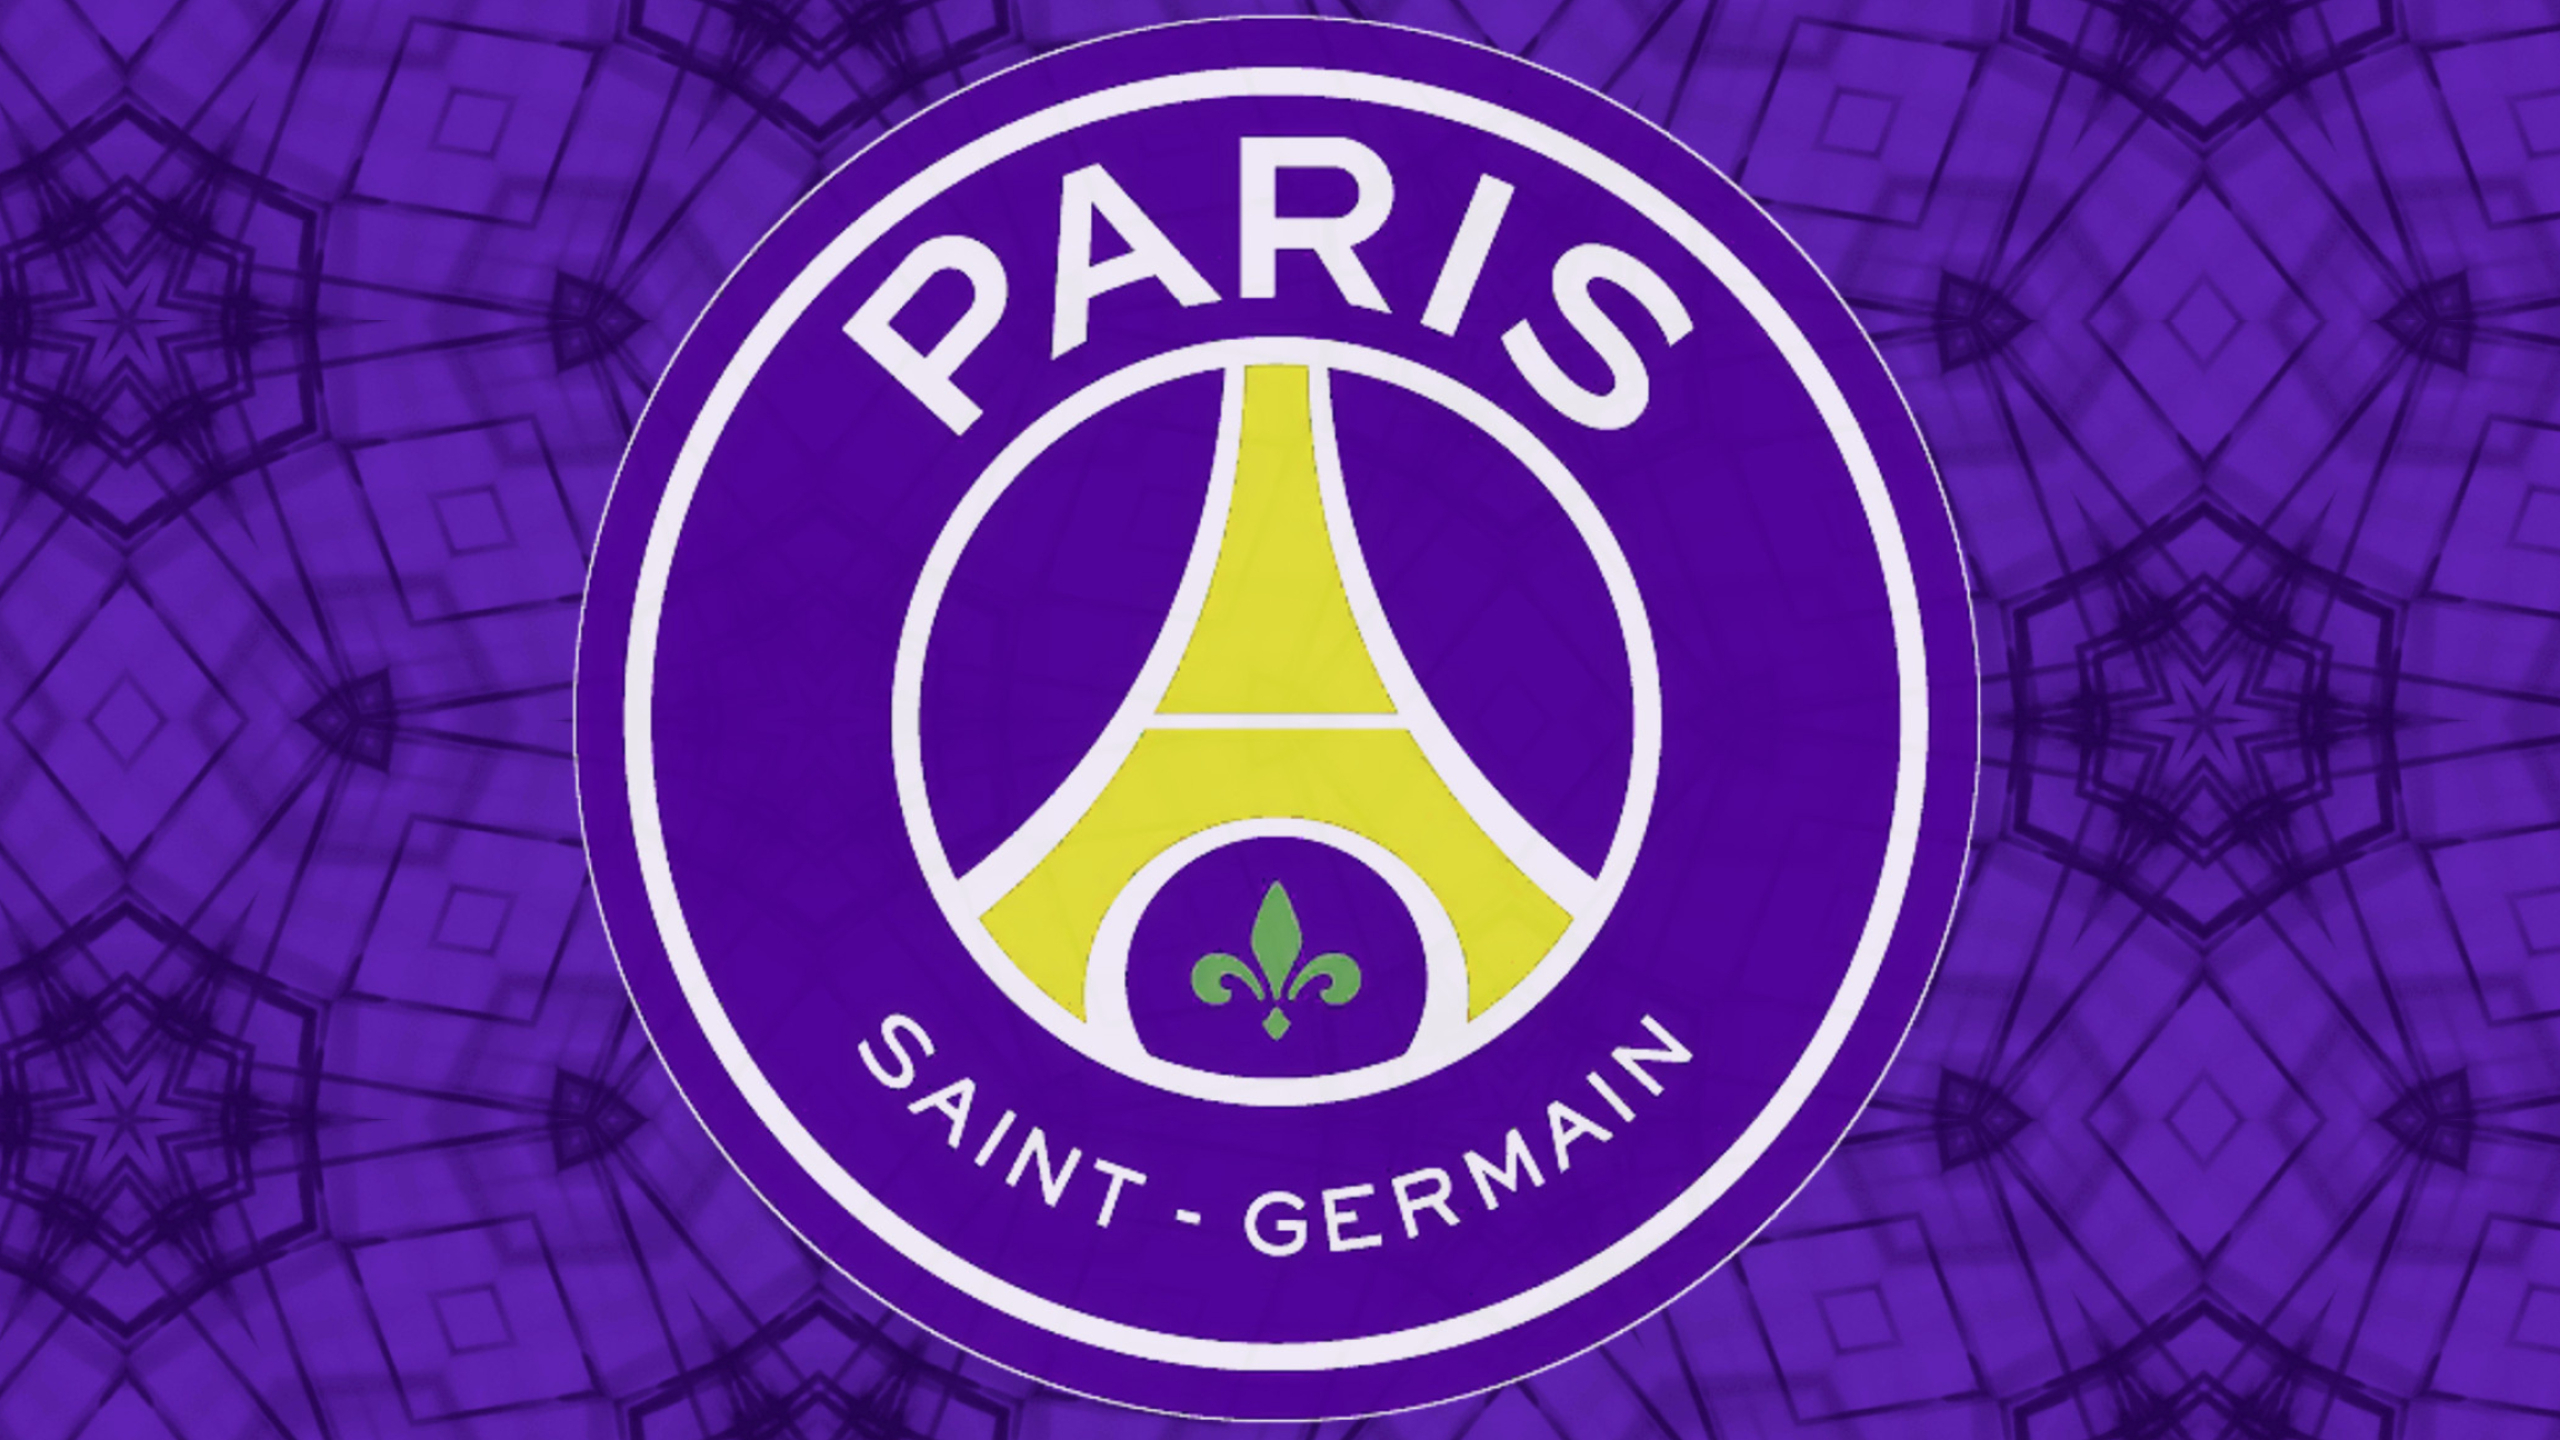 Paris Saint-Germain: Founded in 1970, following the merger of Paris FC and Stade Saint-Germain. 2560x1440 HD Background.